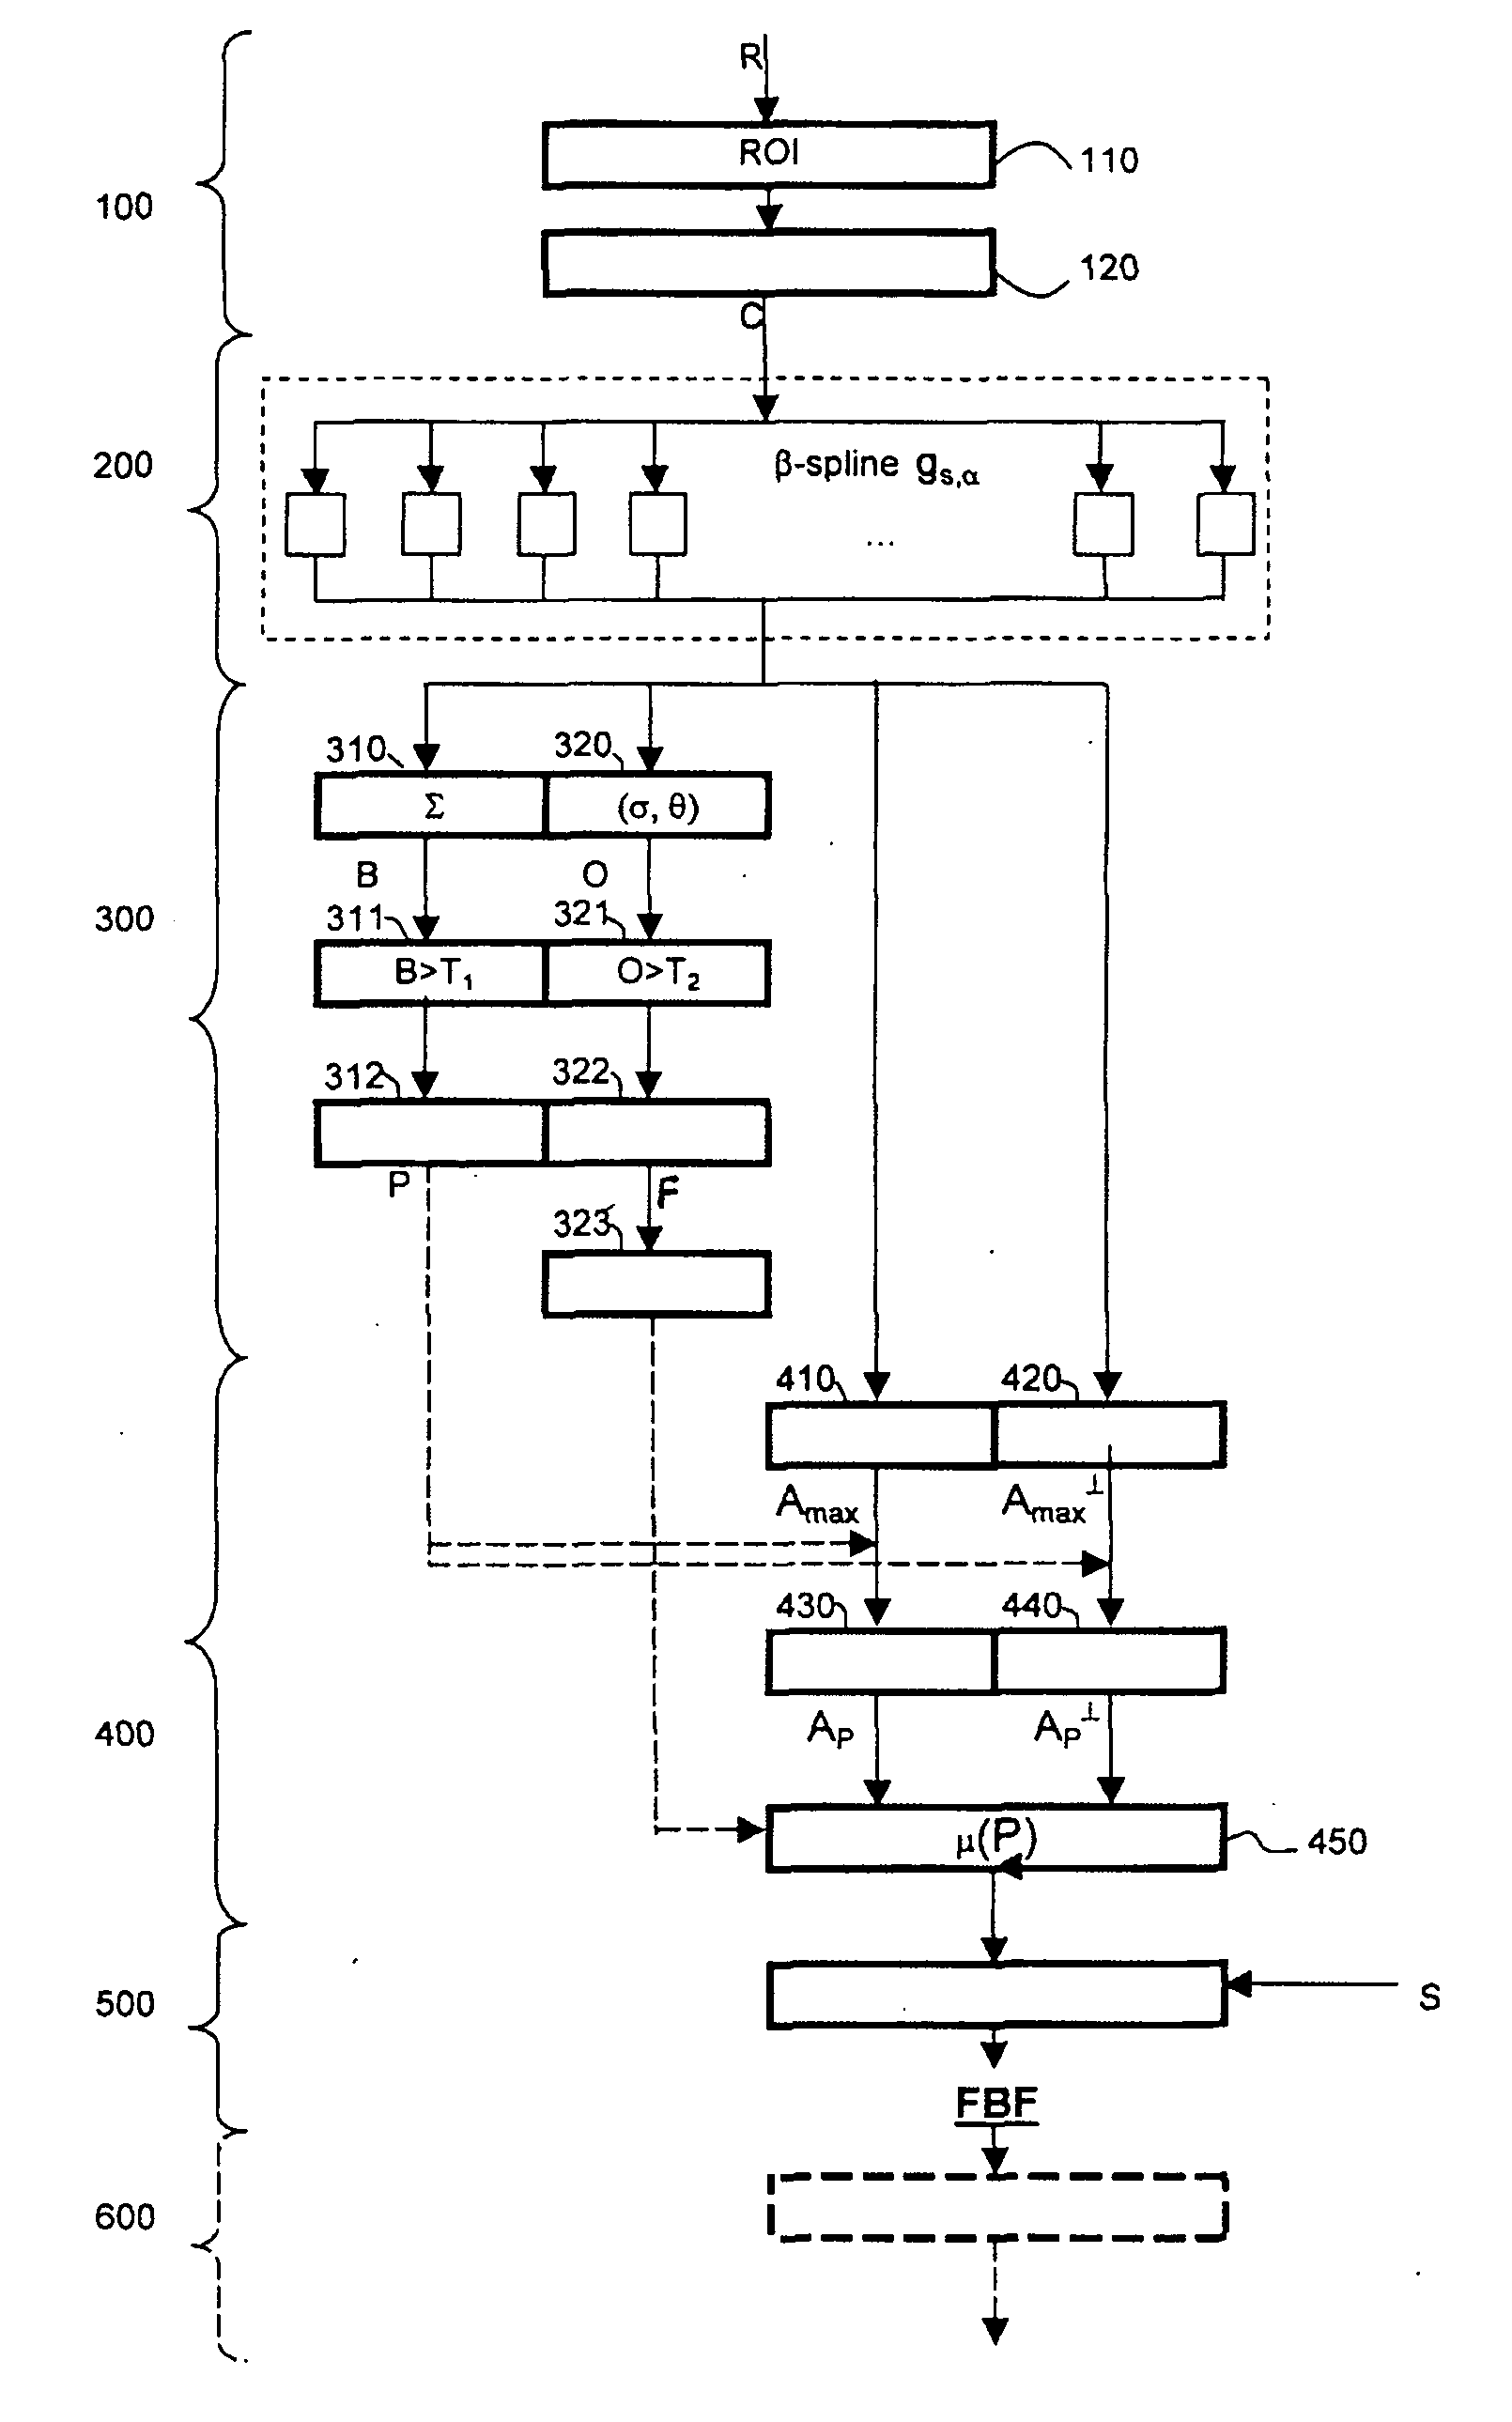 Method for radiological image processing